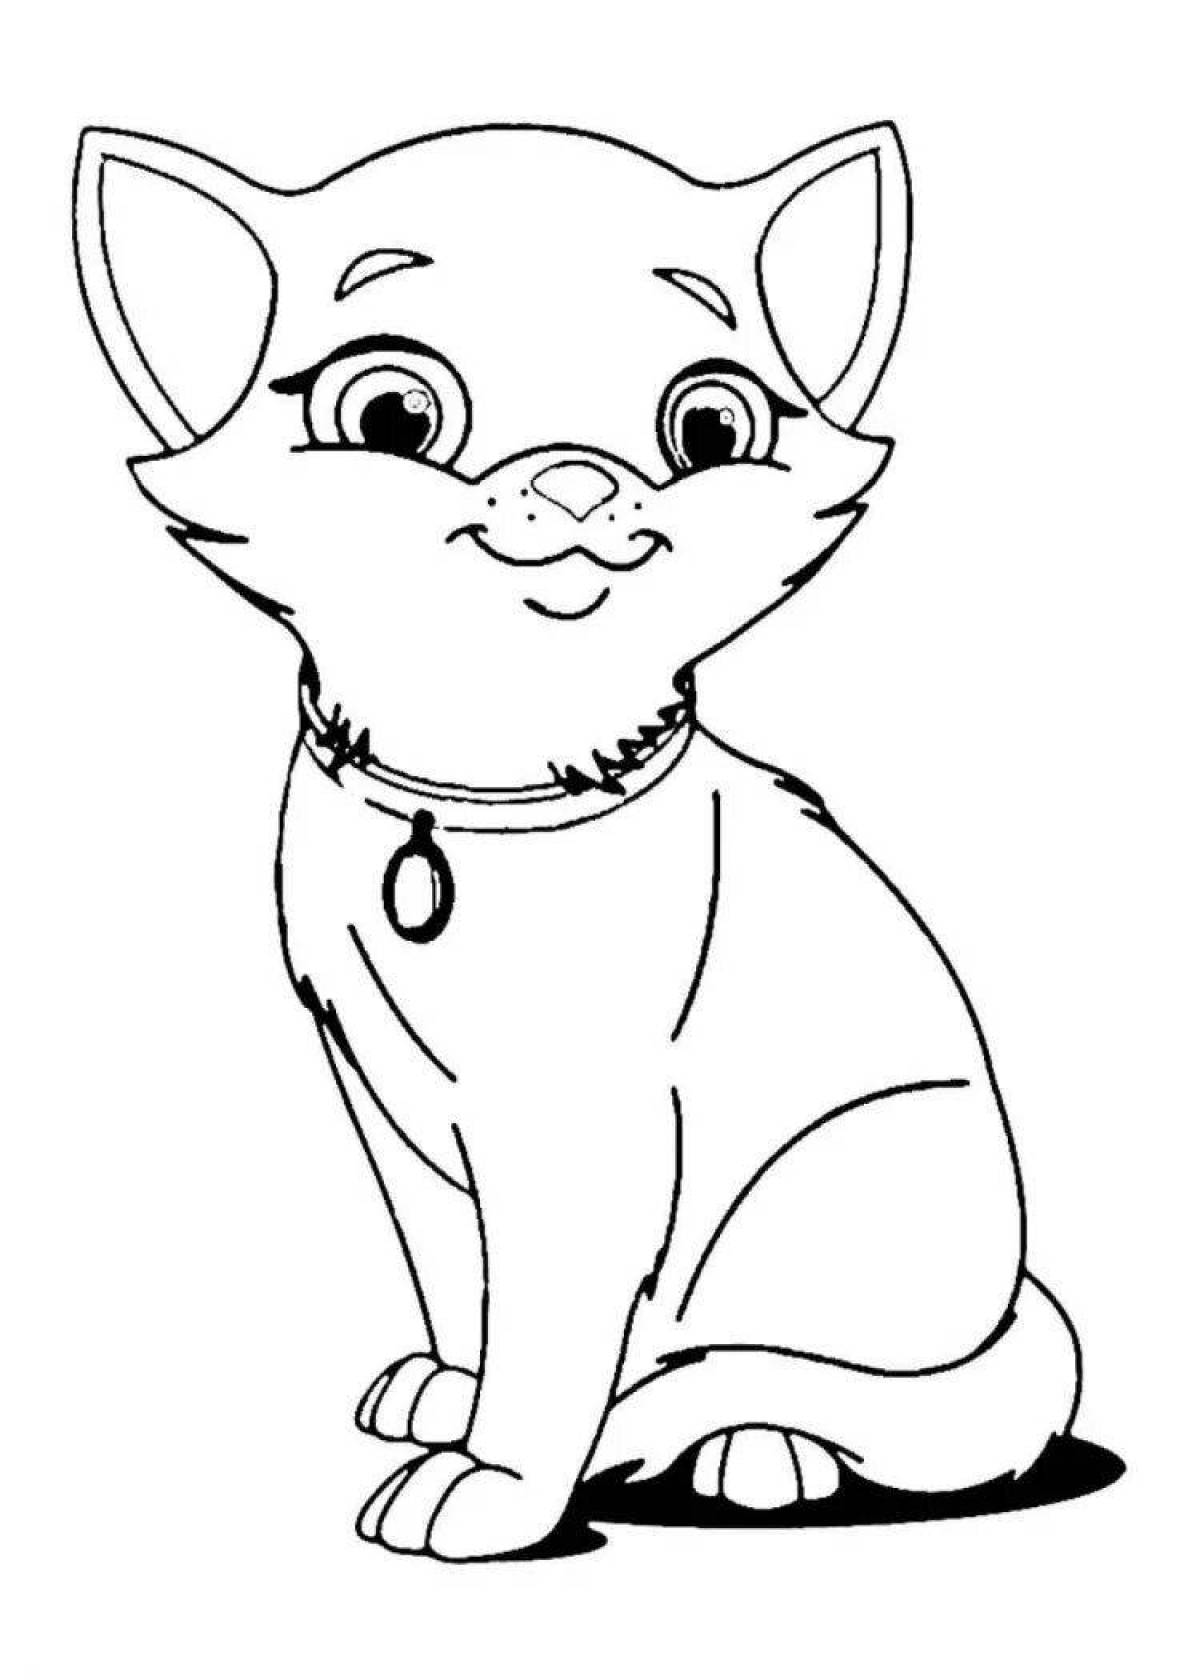 Cat cartoon coloring pages